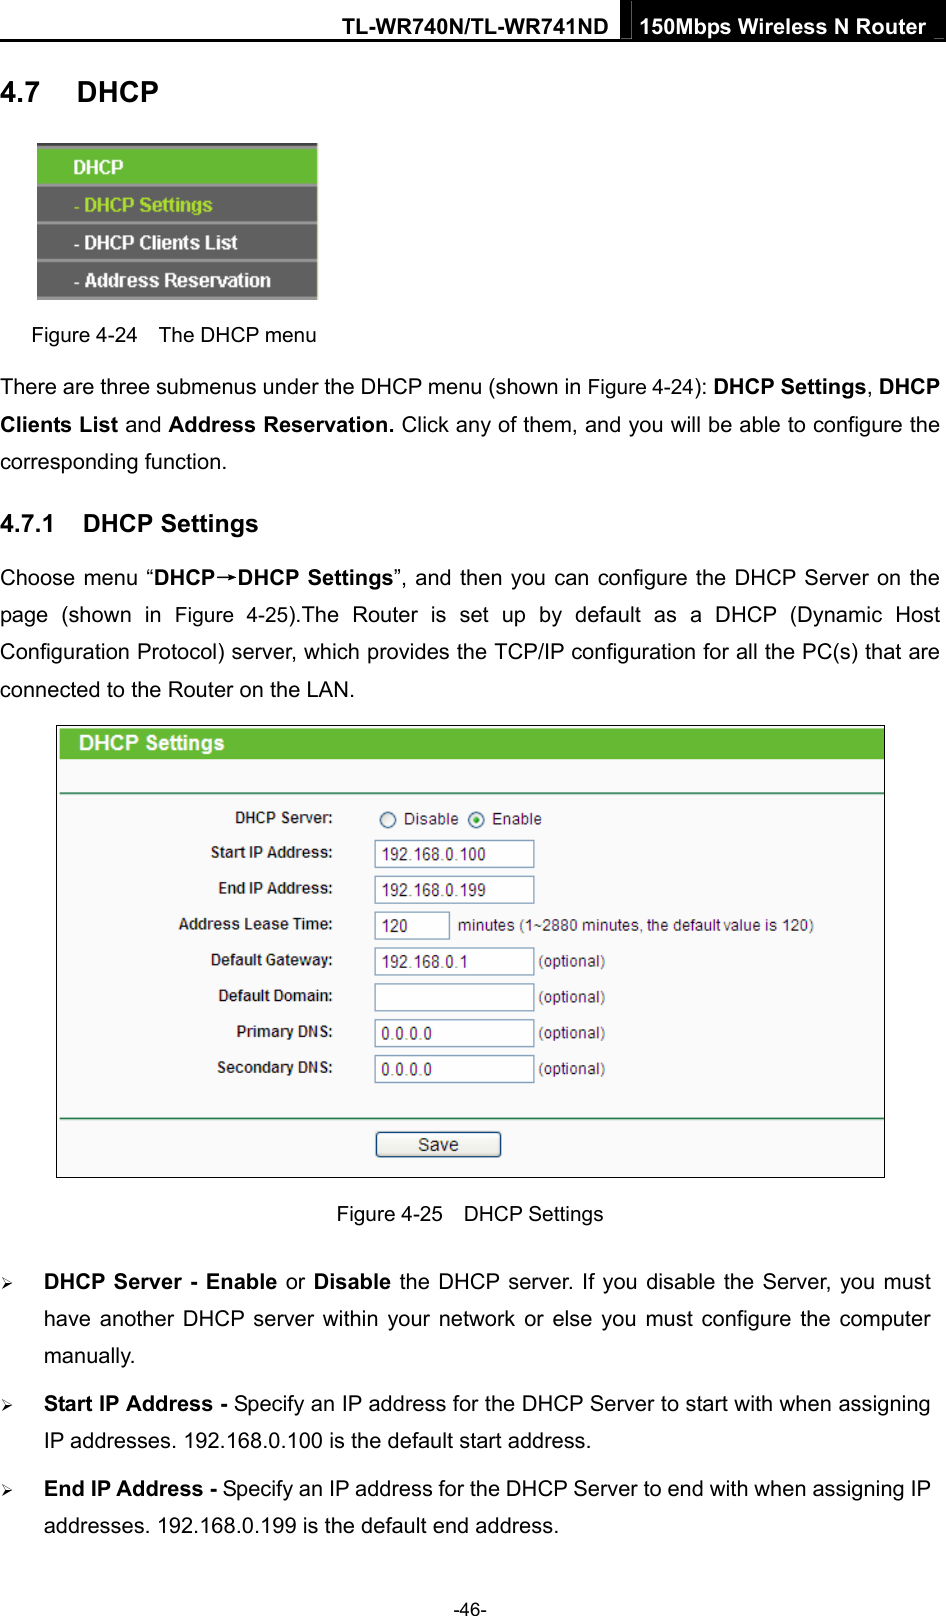 TL-WR740N/TL-WR741ND 150Mbps Wireless N Router  -46- 4.7  DHCP  Figure 4-24    The DHCP menu There are three submenus under the DHCP menu (shown in Figure 4-24): DHCP Settings, DHCP Clients List and Address Reservation. Click any of them, and you will be able to configure the corresponding function. 4.7.1  DHCP Settings Choose menu “DHCP→DHCP Settings”, and then you can configure the DHCP Server on the page (shown in Figure 4-25).The Router is set up by default as a DHCP (Dynamic Host Configuration Protocol) server, which provides the TCP/IP configuration for all the PC(s) that are connected to the Router on the LAN.    Figure 4-25  DHCP Settings ¾ DHCP Server - Enable or Disable the DHCP server. If you disable the Server, you must have another DHCP server within your network or else you must configure the computer manually. ¾ Start IP Address - Specify an IP address for the DHCP Server to start with when assigning IP addresses. 192.168.0.100 is the default start address. ¾ End IP Address - Specify an IP address for the DHCP Server to end with when assigning IP addresses. 192.168.0.199 is the default end address. 